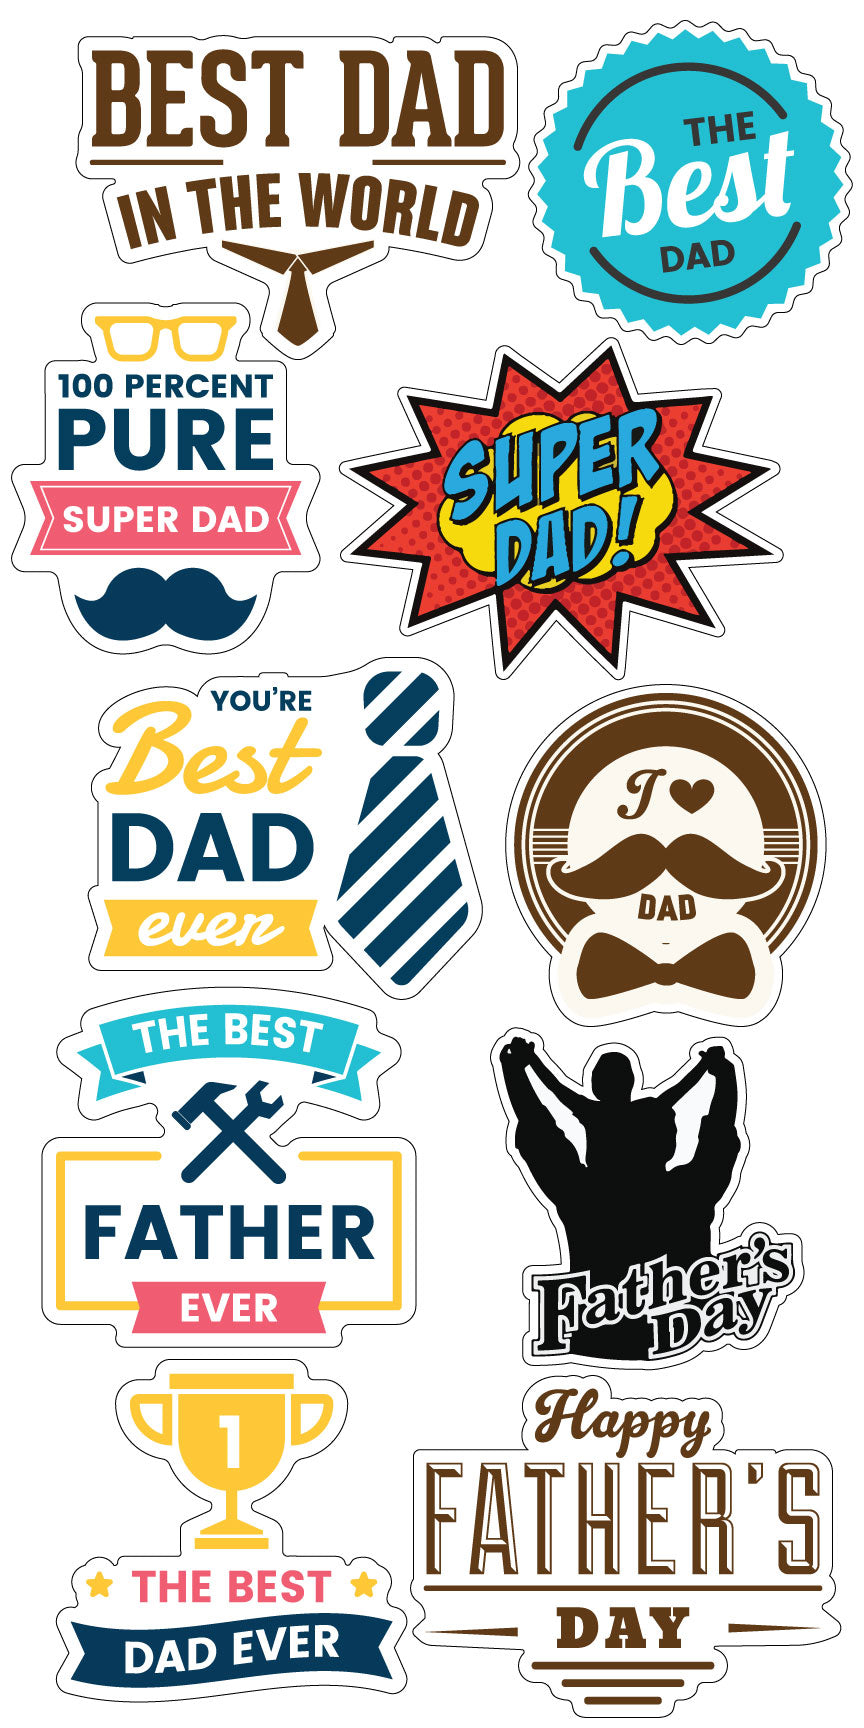 Happy Father's Day Sayings - Sweet sayings about Dad!